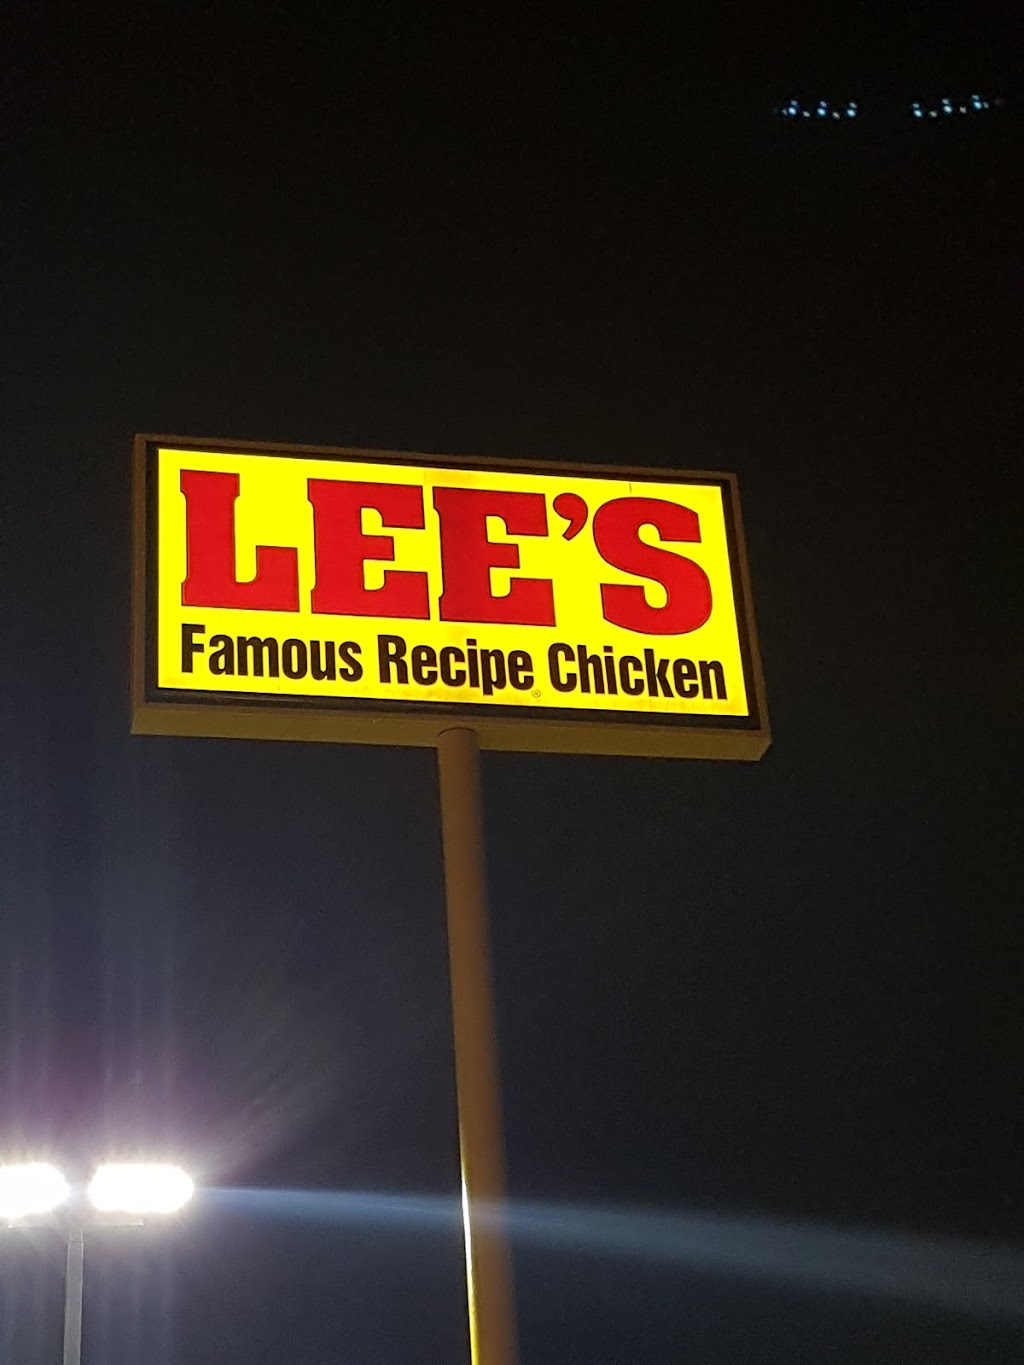 Lees Famous Recipe Chicken | 1012 S 5th St, St Charles, MO 63301 | Phone: (636) 949-9966